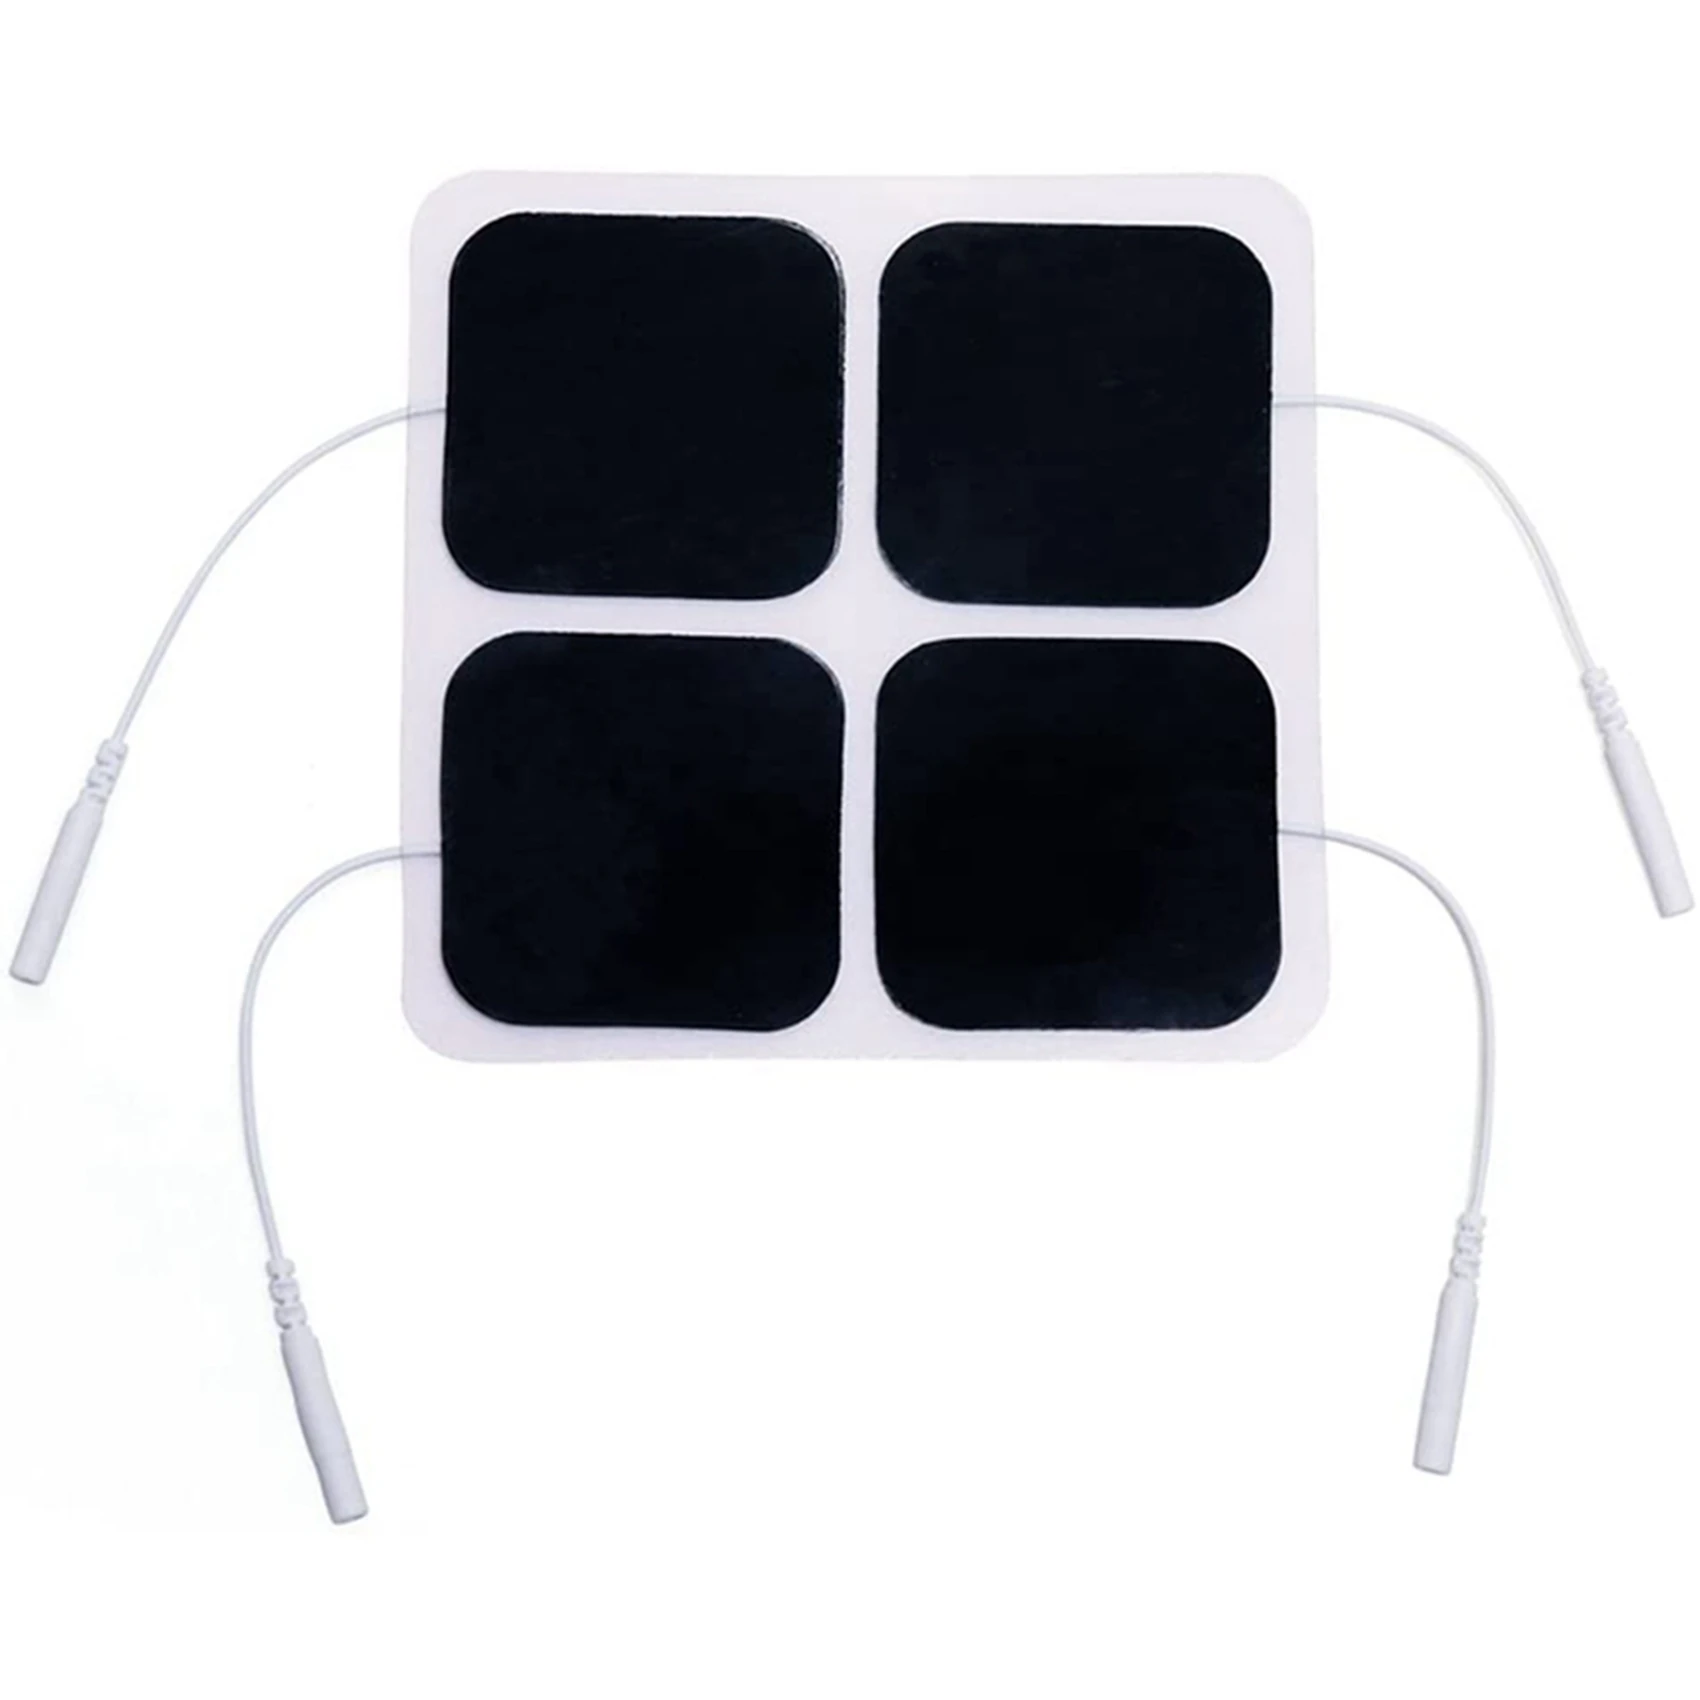 80Pcs TENS Unit Pads, 2X2 Electrodes for EMS Muscle Stimulator Electrotherapy Pads